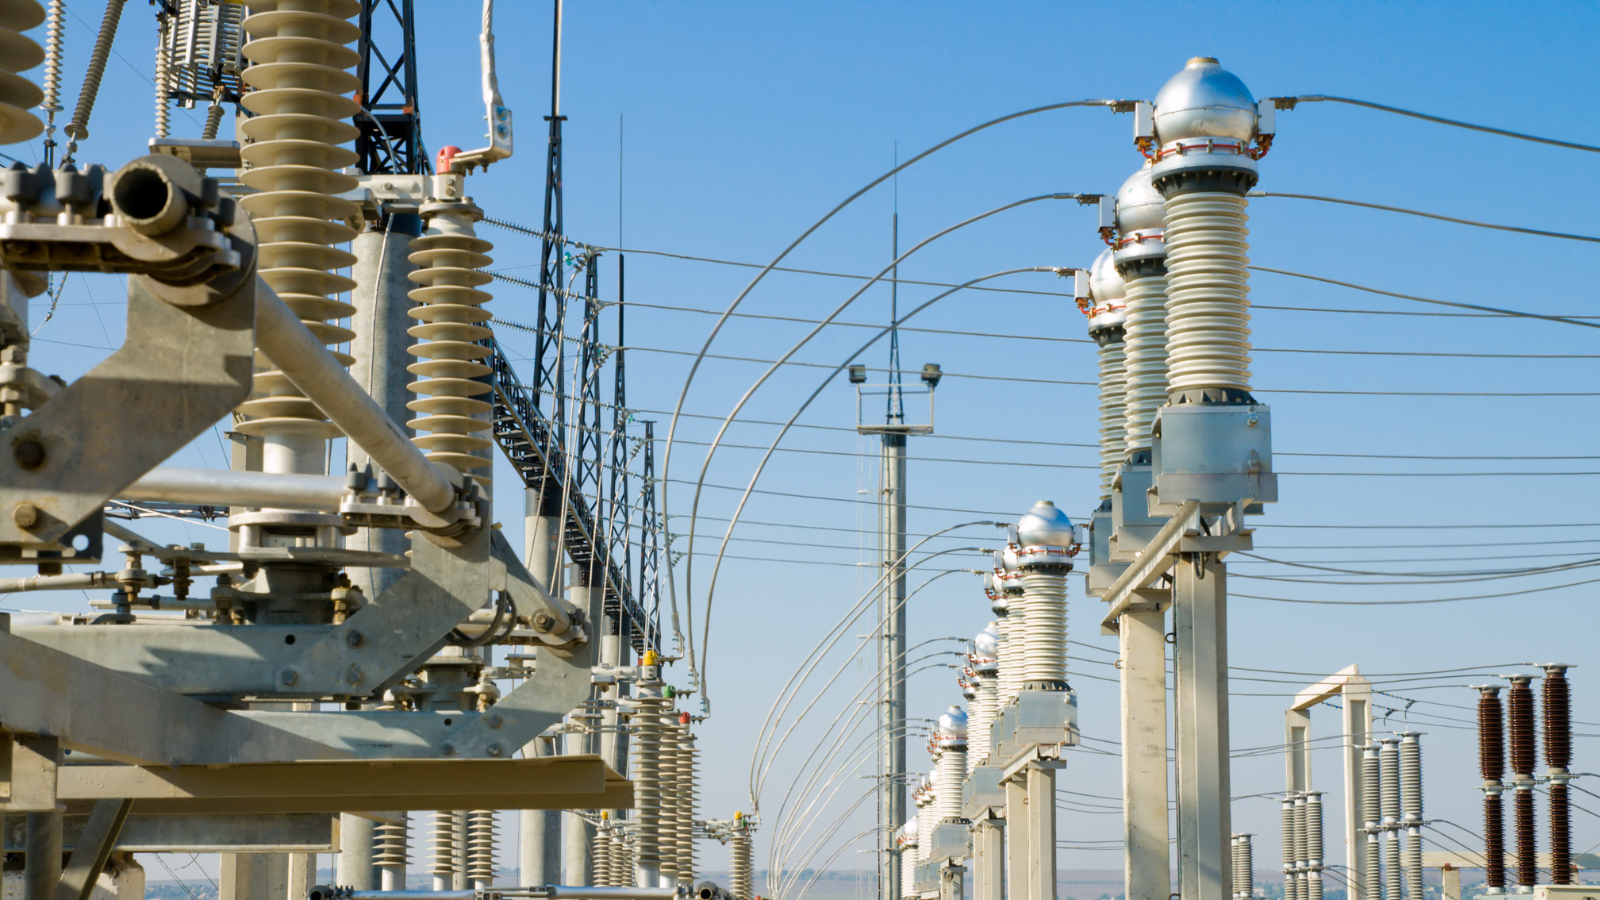 Project for continuous system monitoring of by-products resulting from SF6 degradation in high voltage equipment of the transmission grid using THz